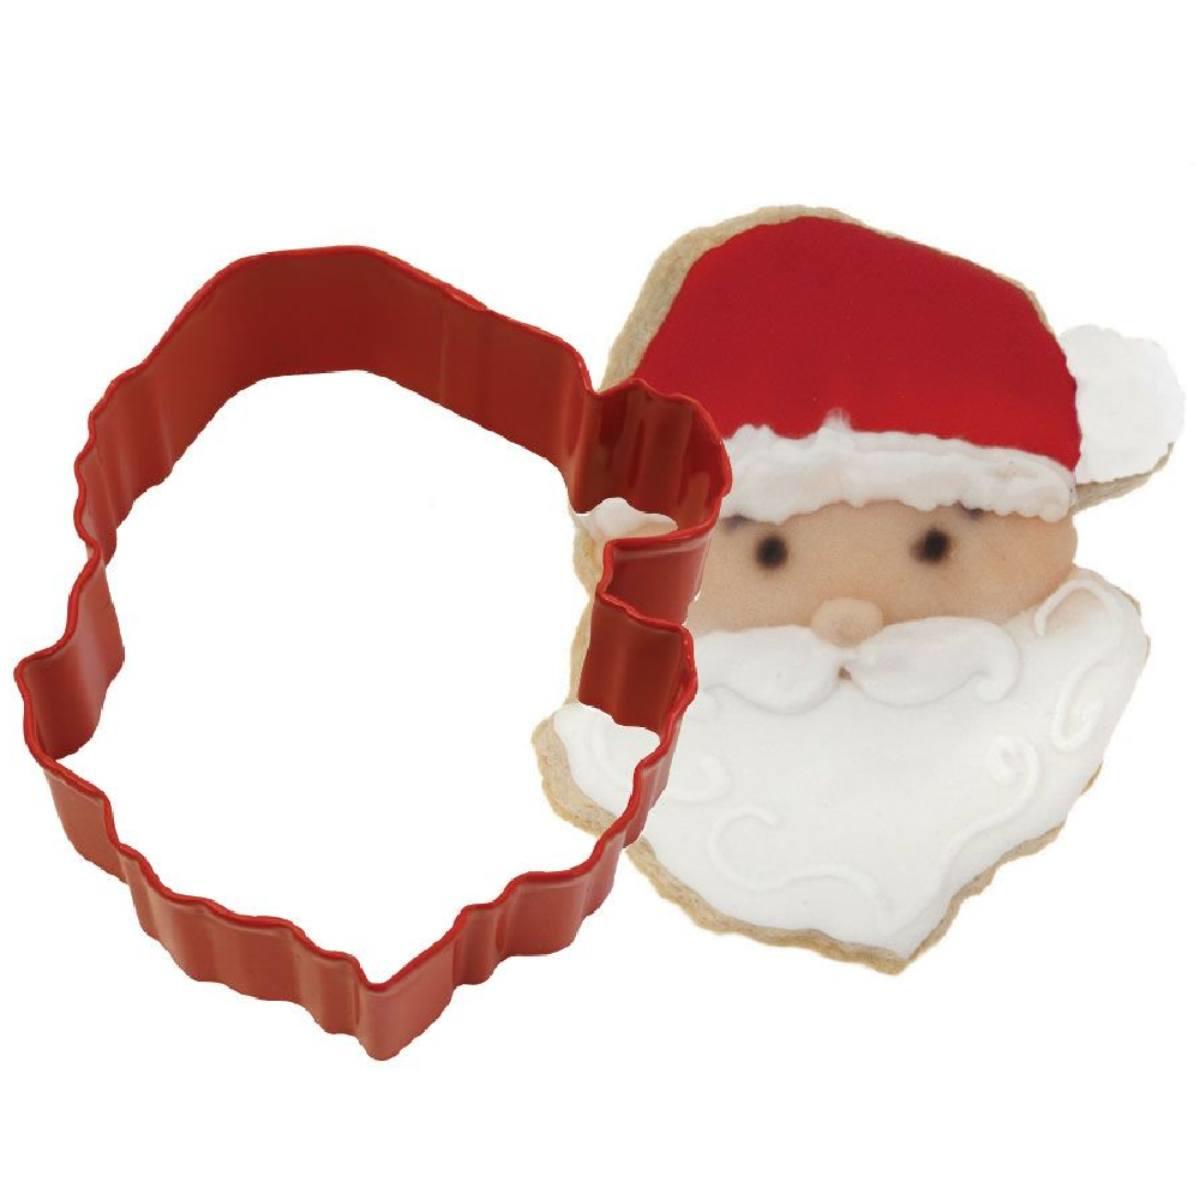 Father Christmas or Santa cookie cutter by Anniversary House K1114 available here at Karnival Costumes online party shop